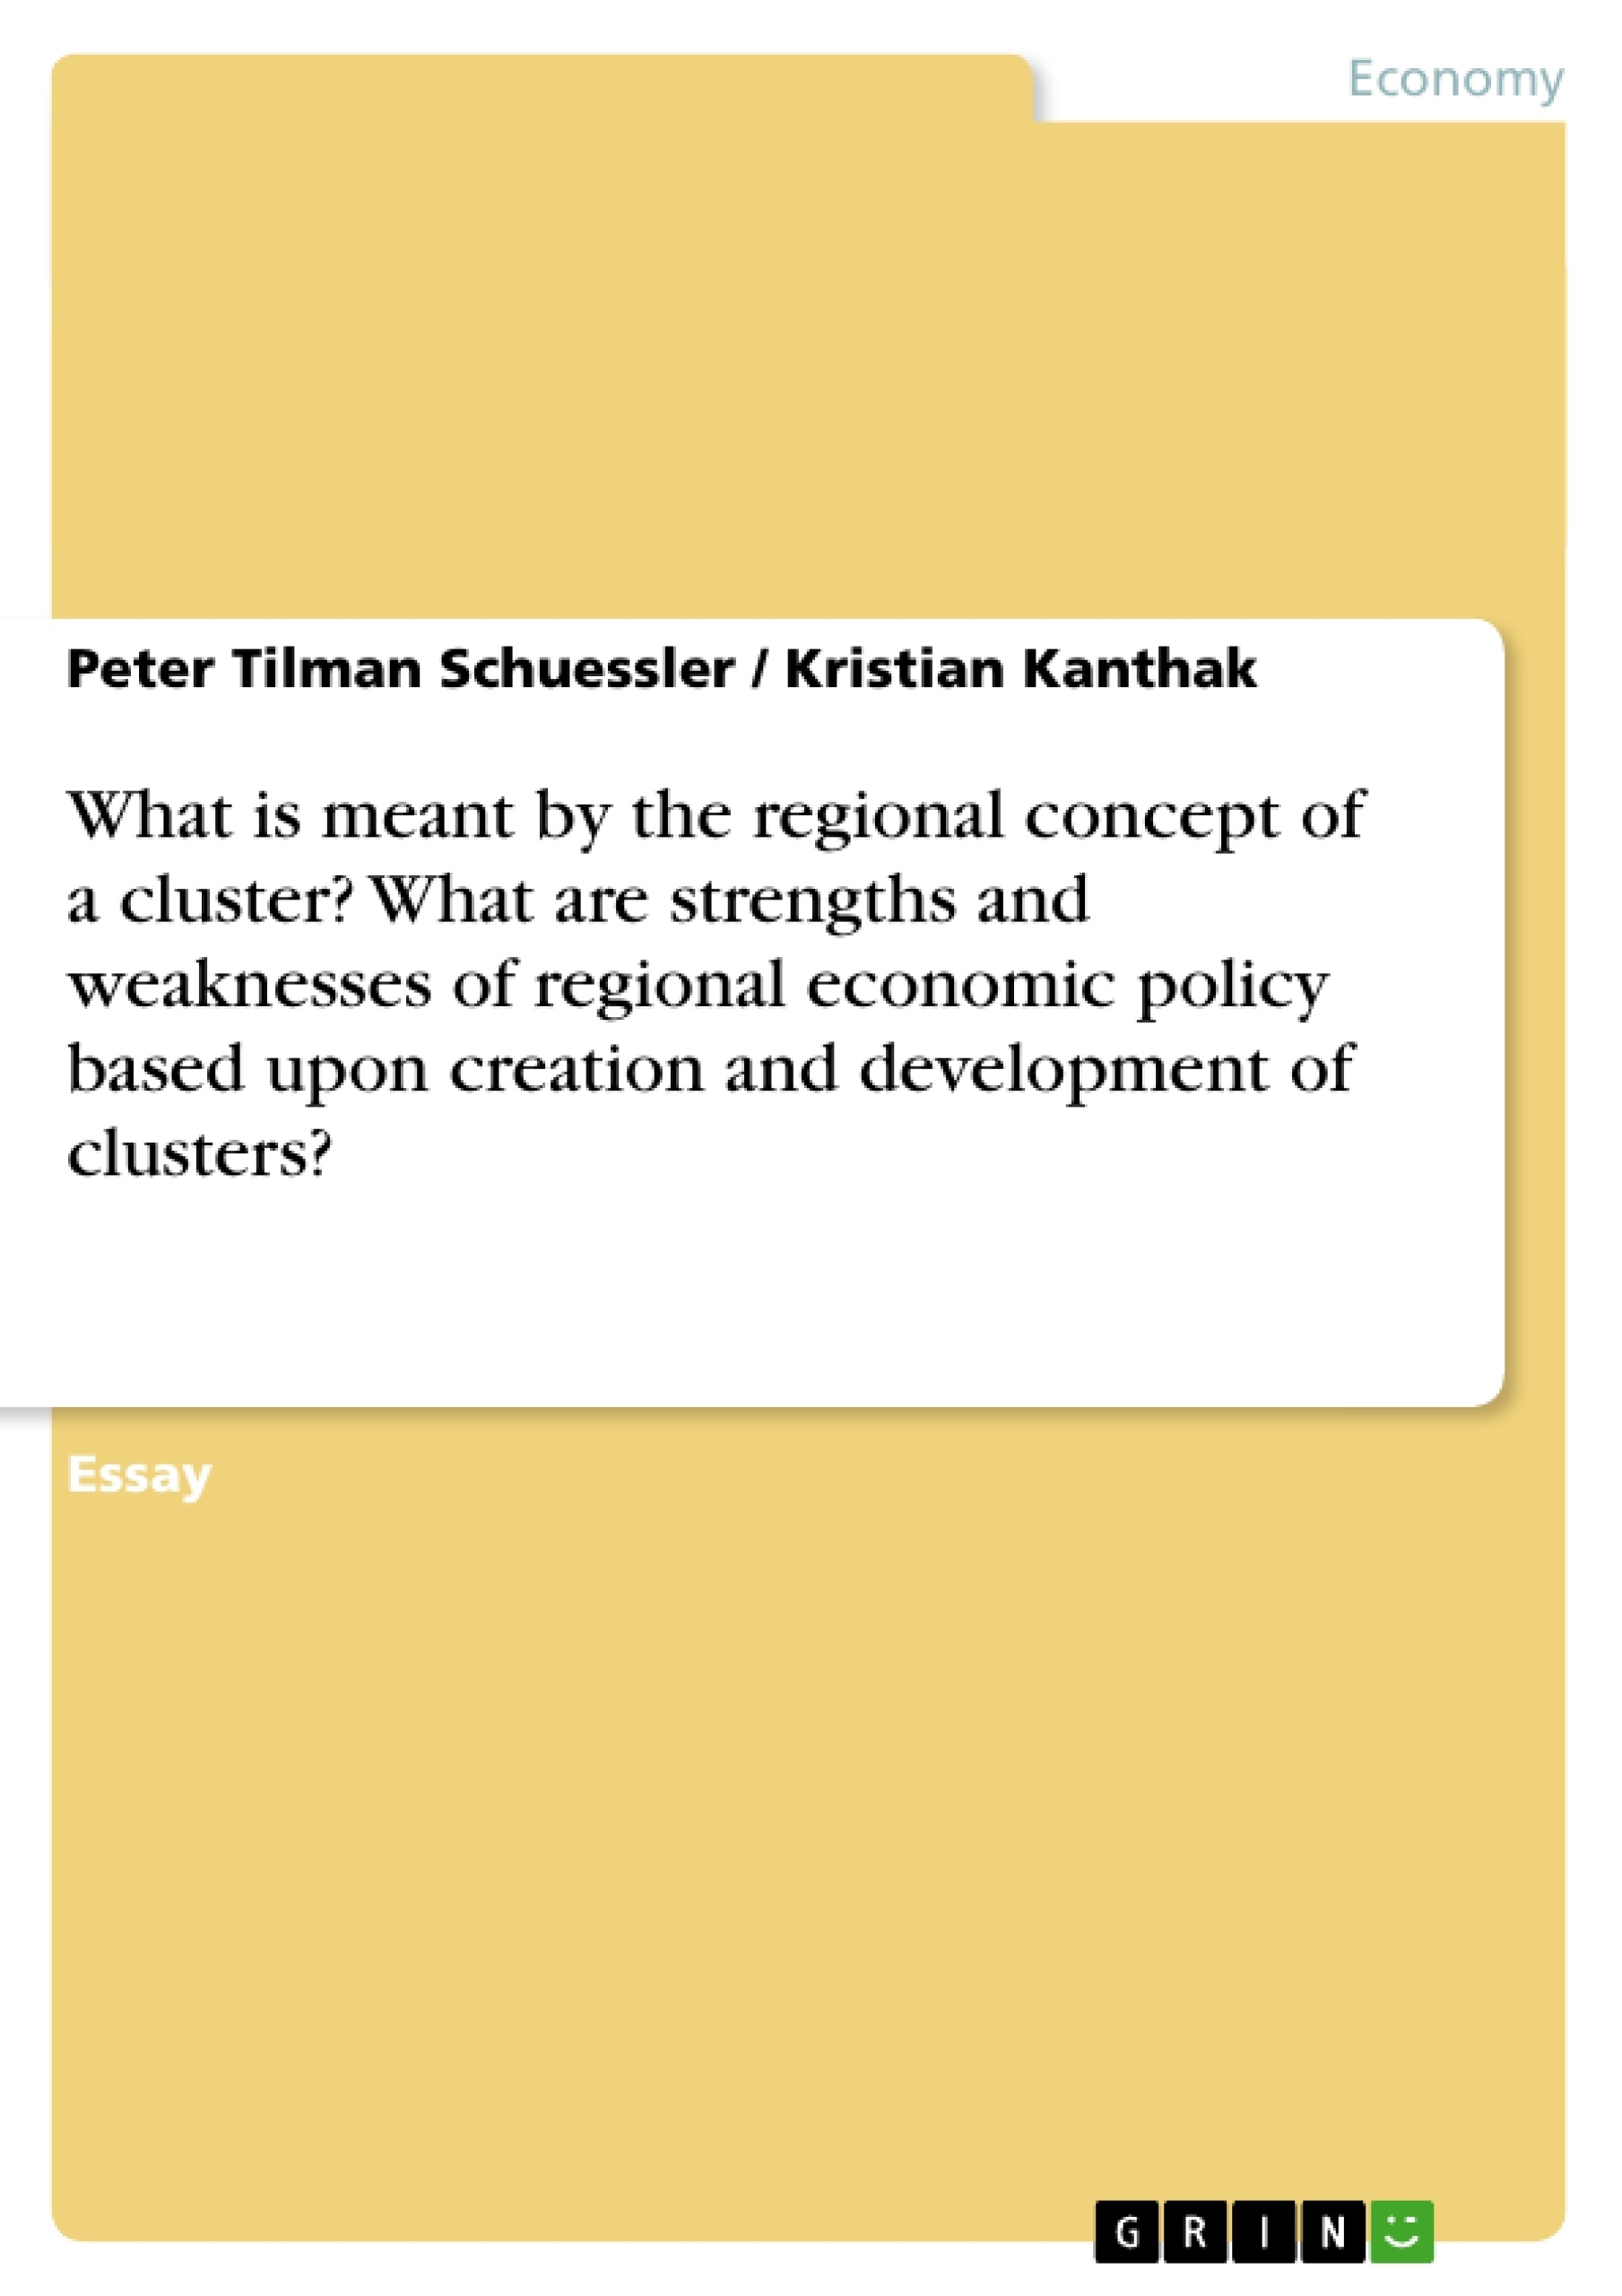 Title: What is meant by the regional concept of a cluster? What are strengths and weaknesses of regional economic policy based upon creation and development of clusters?